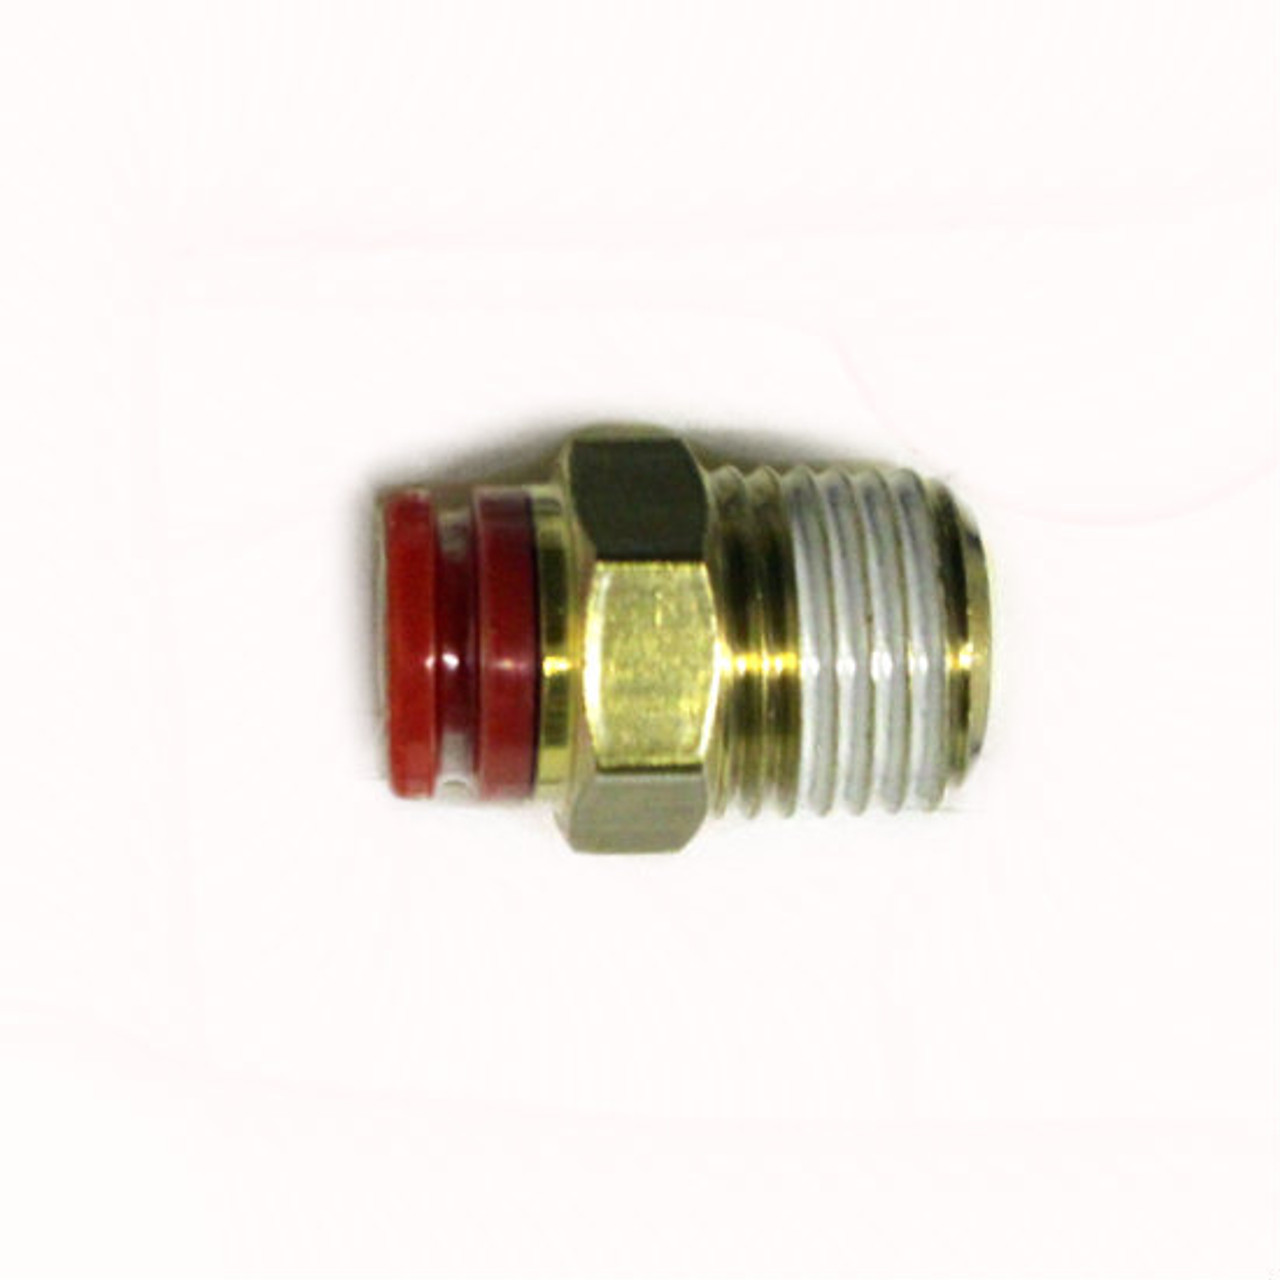 Schnitz Fitting Brass Quick Connect 1/4" NPT Male to 1/4" Line